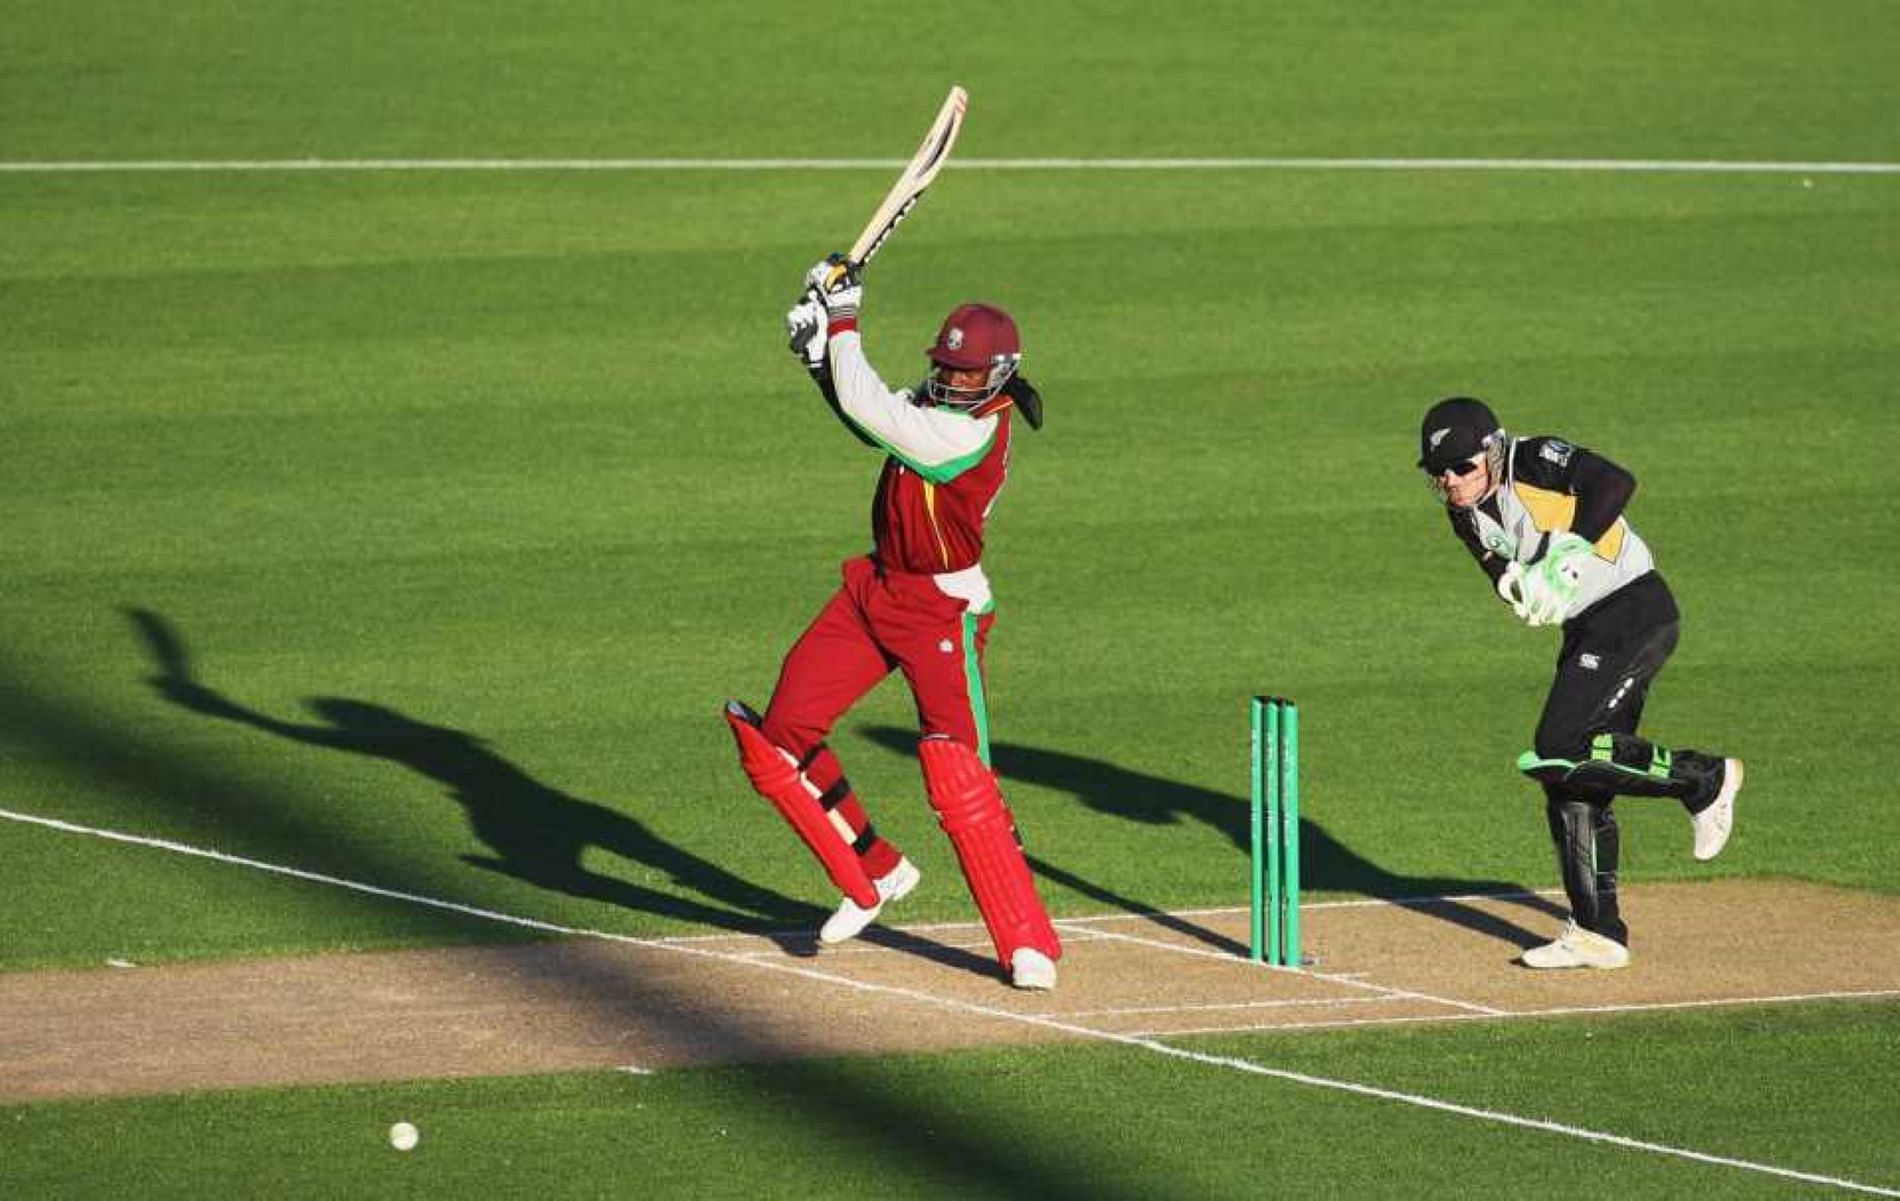 Chris Gayle put on a majestic performance against New Zealand.